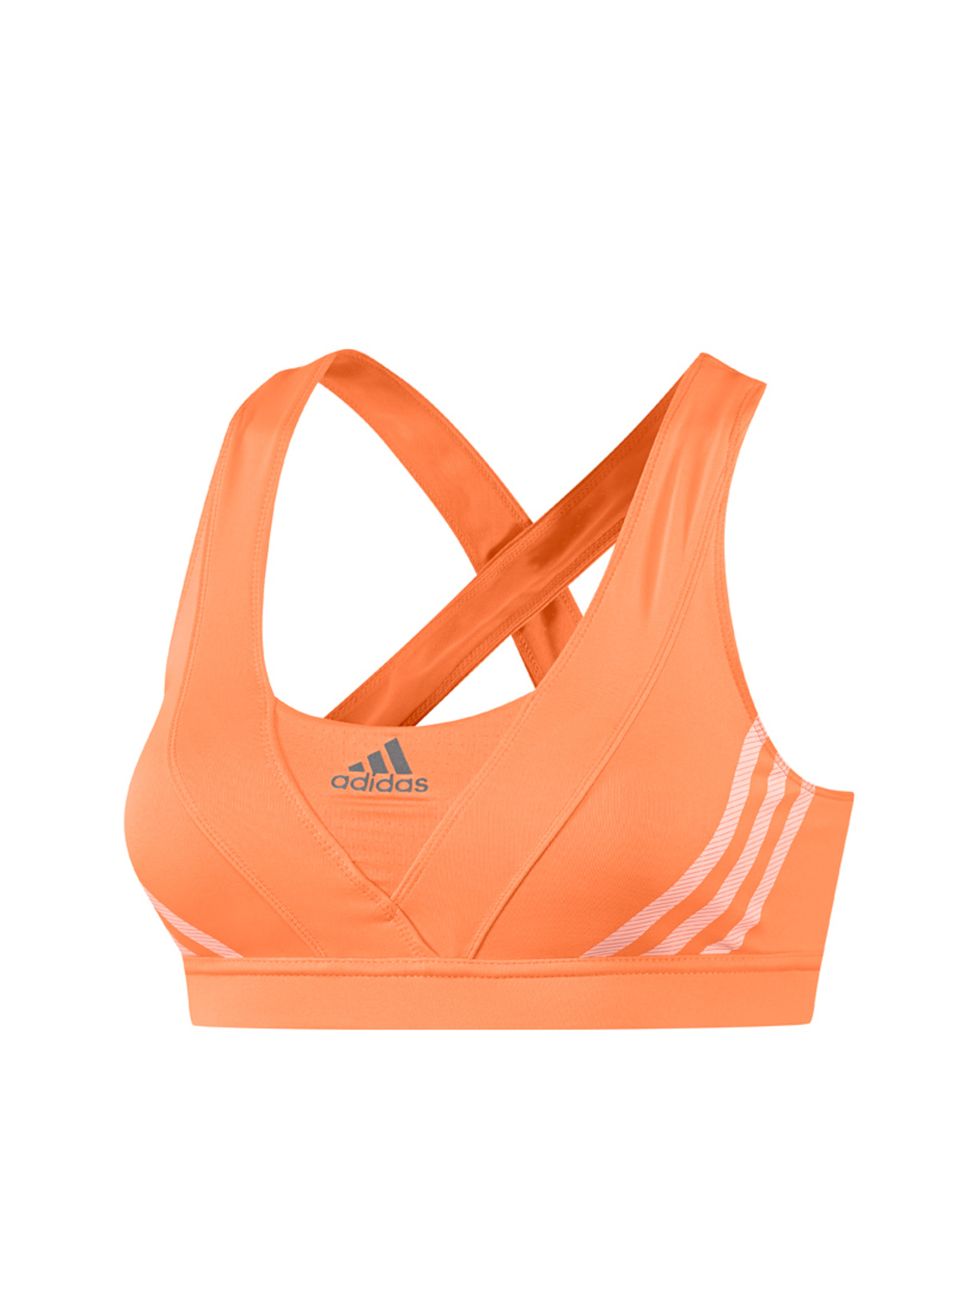 <p><strong><a href="www.adidas.co.uk">Adidas Supernova Racer Bra, £22</a></strong></p><p><strong>Sizes:</strong> 2 - 22</p><p><strong>Tested by:</strong> Amy</p><p><strong>Comfort:</strong> Feels secure but not tight. Climacool fabric technology apparentl